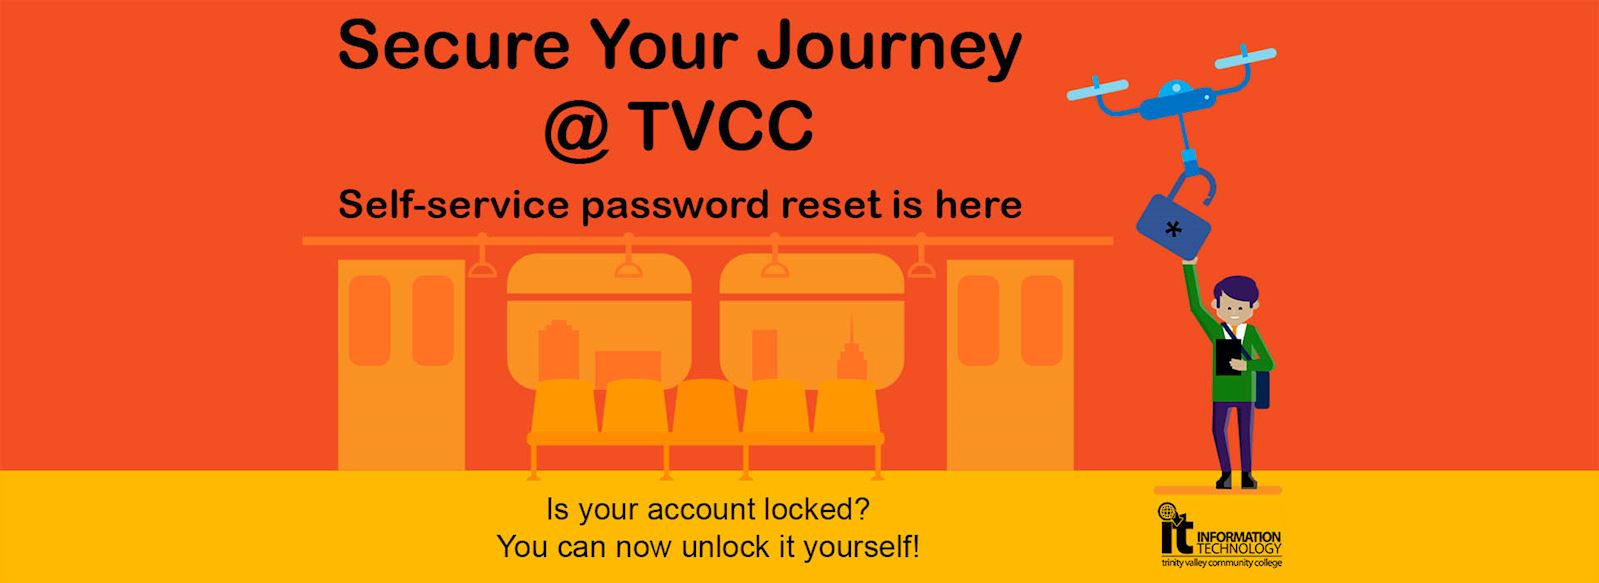 Secure Your Journey @ TVCC. Self-service password reset is here. Is your account locked?  You can now unlock it yourself!